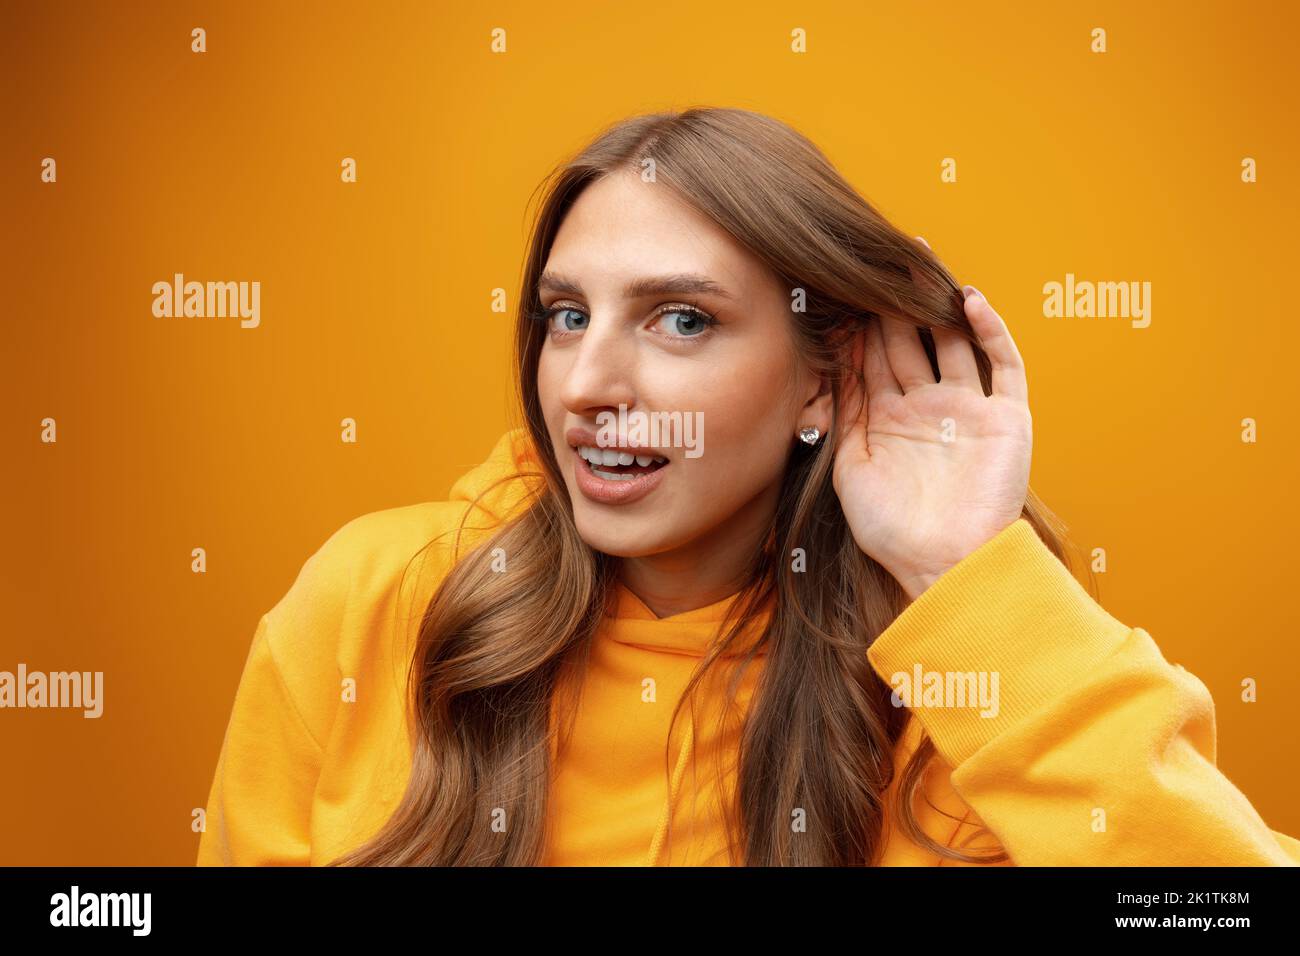 Young woman smiling with hand over ear listening and hearing on yellow background Stock Photo